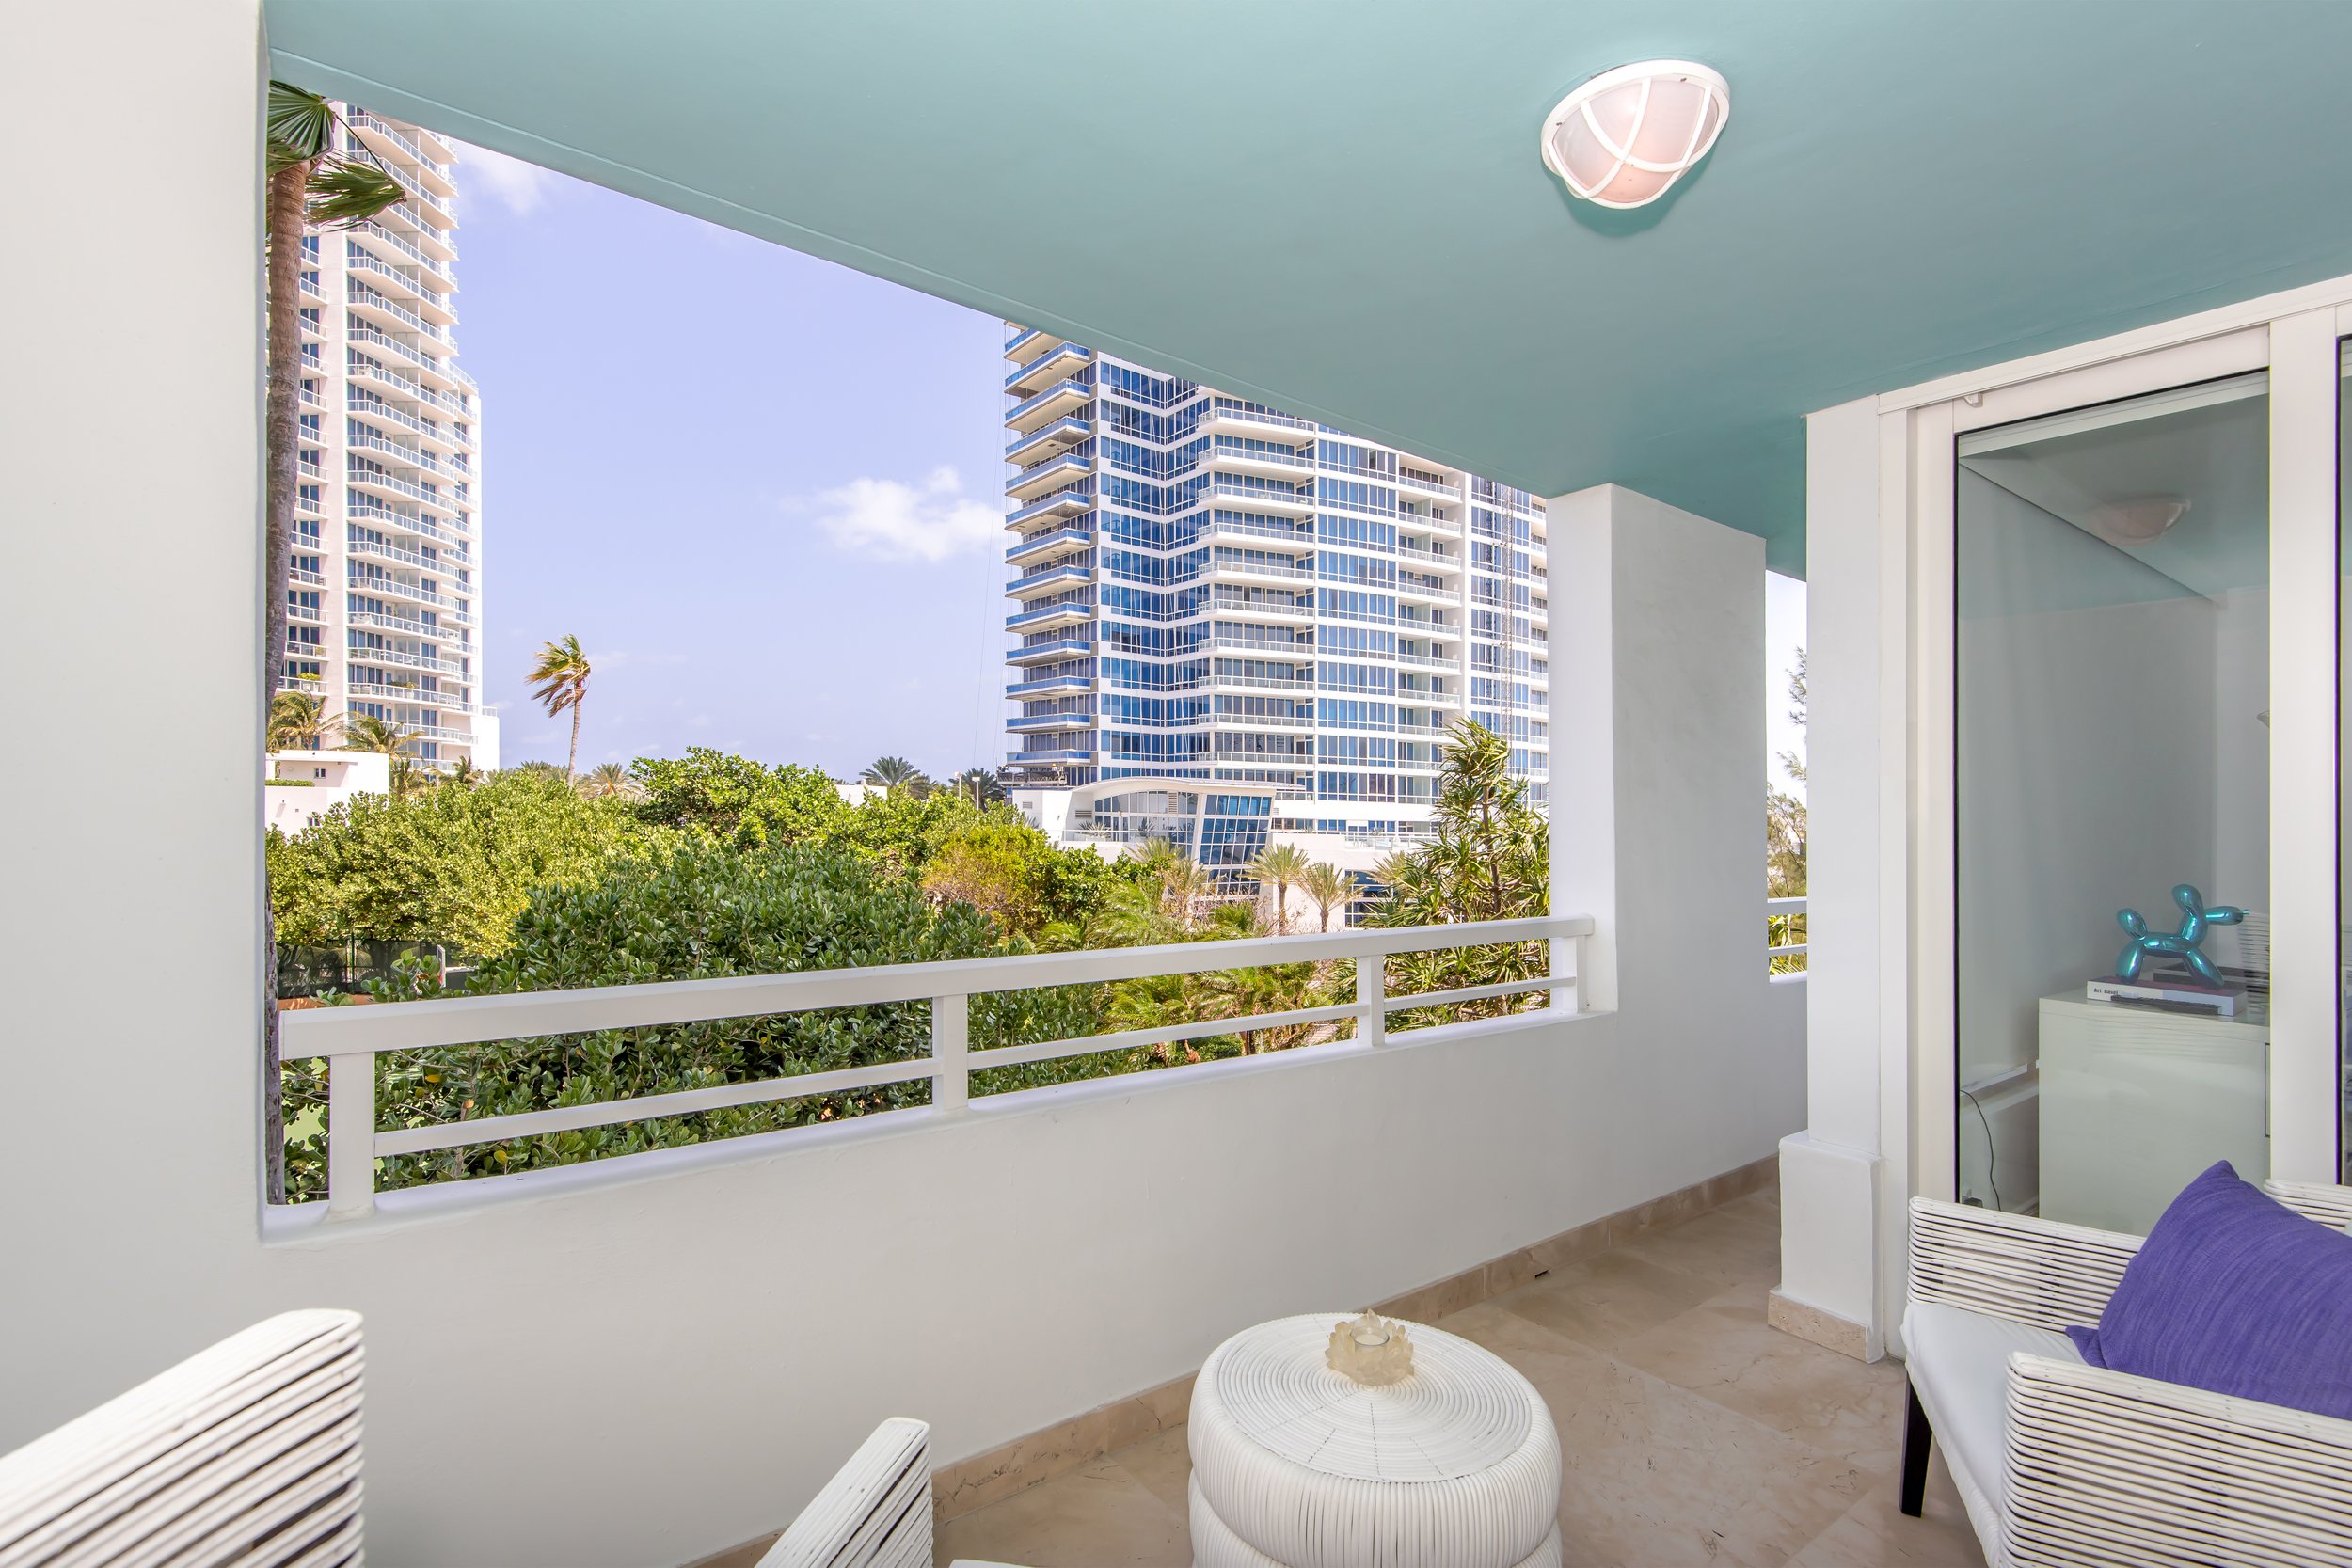 Master Brokers Forum Listing: Check Out This South Beach Corner Unit In South Pointe Tower Asking $2.75 Million 28.jpg